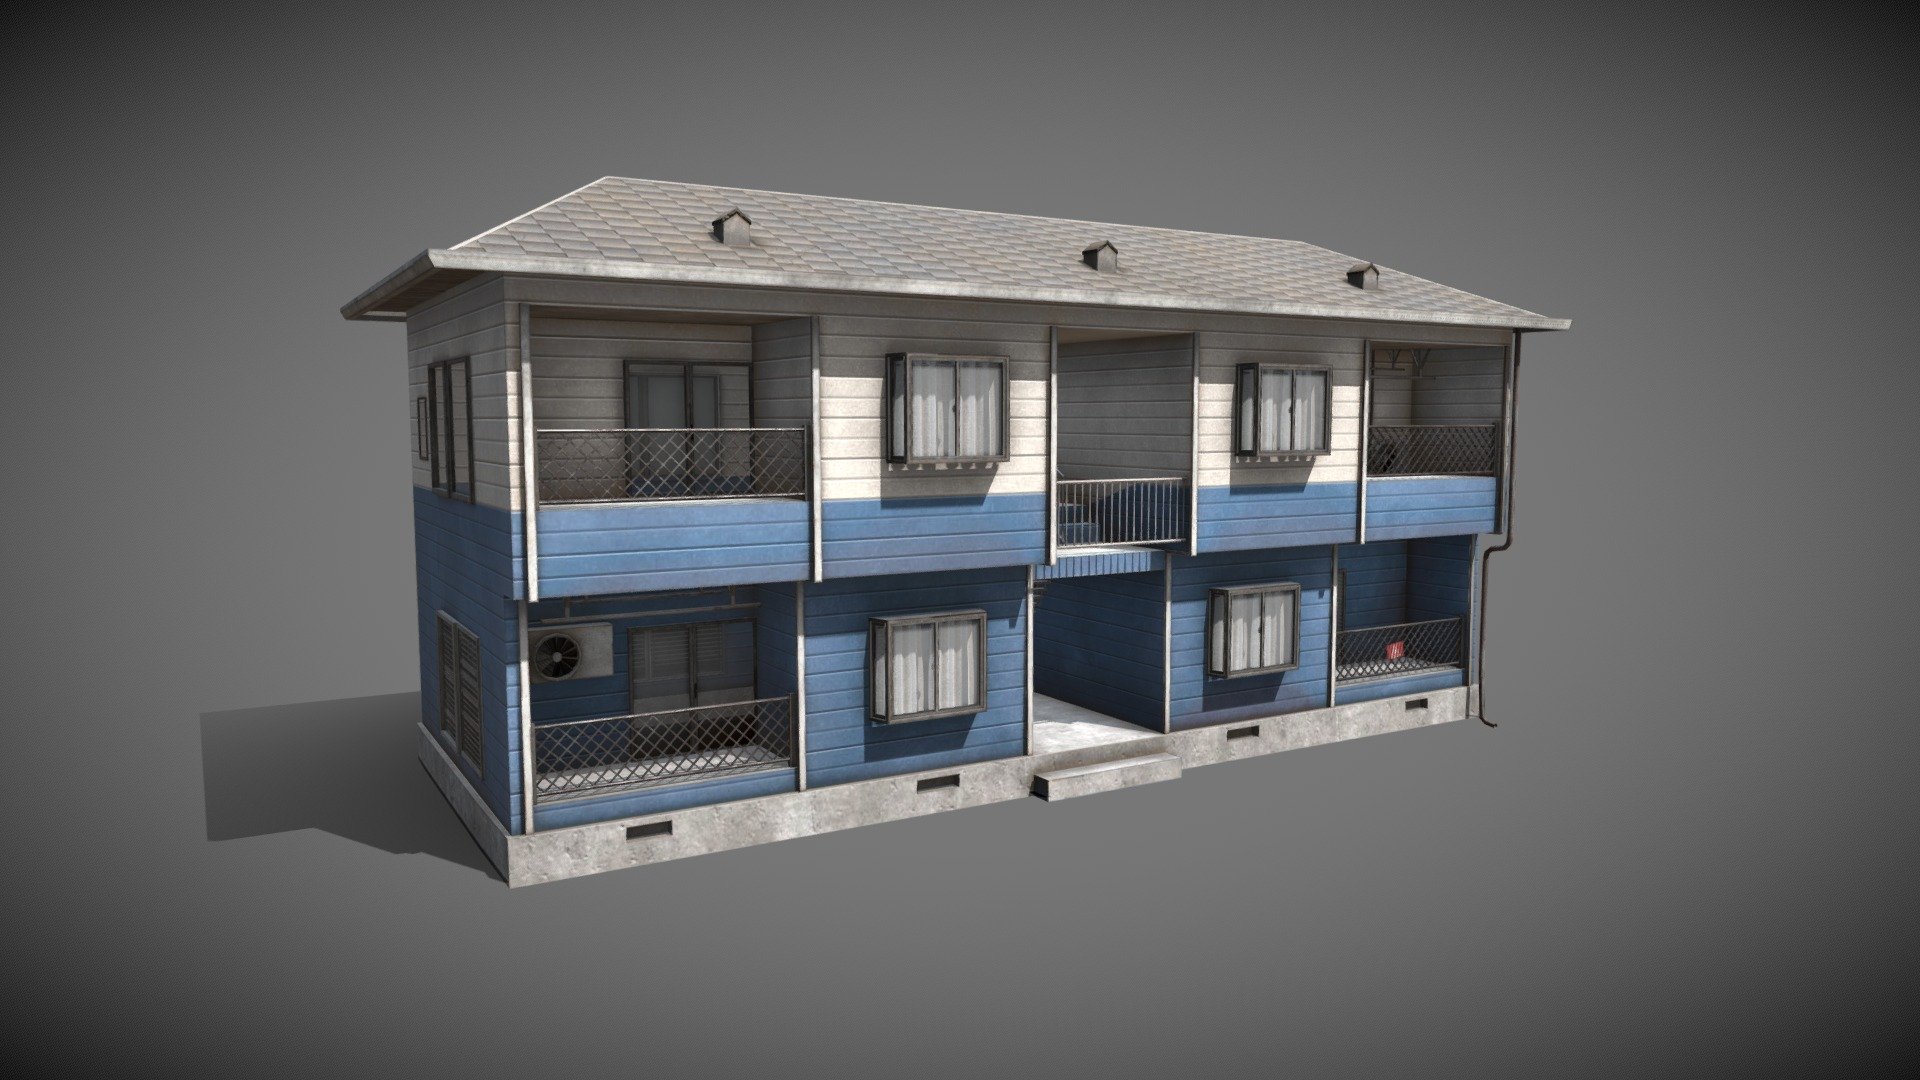 Residential japanese building, ready for games, very low poly.

-2K texture

-1 material

-5 UDIMs

-No pluggins

-OBJ and FBX

-Maps included: basecolor, height, normal, roughness, metallic 3d model